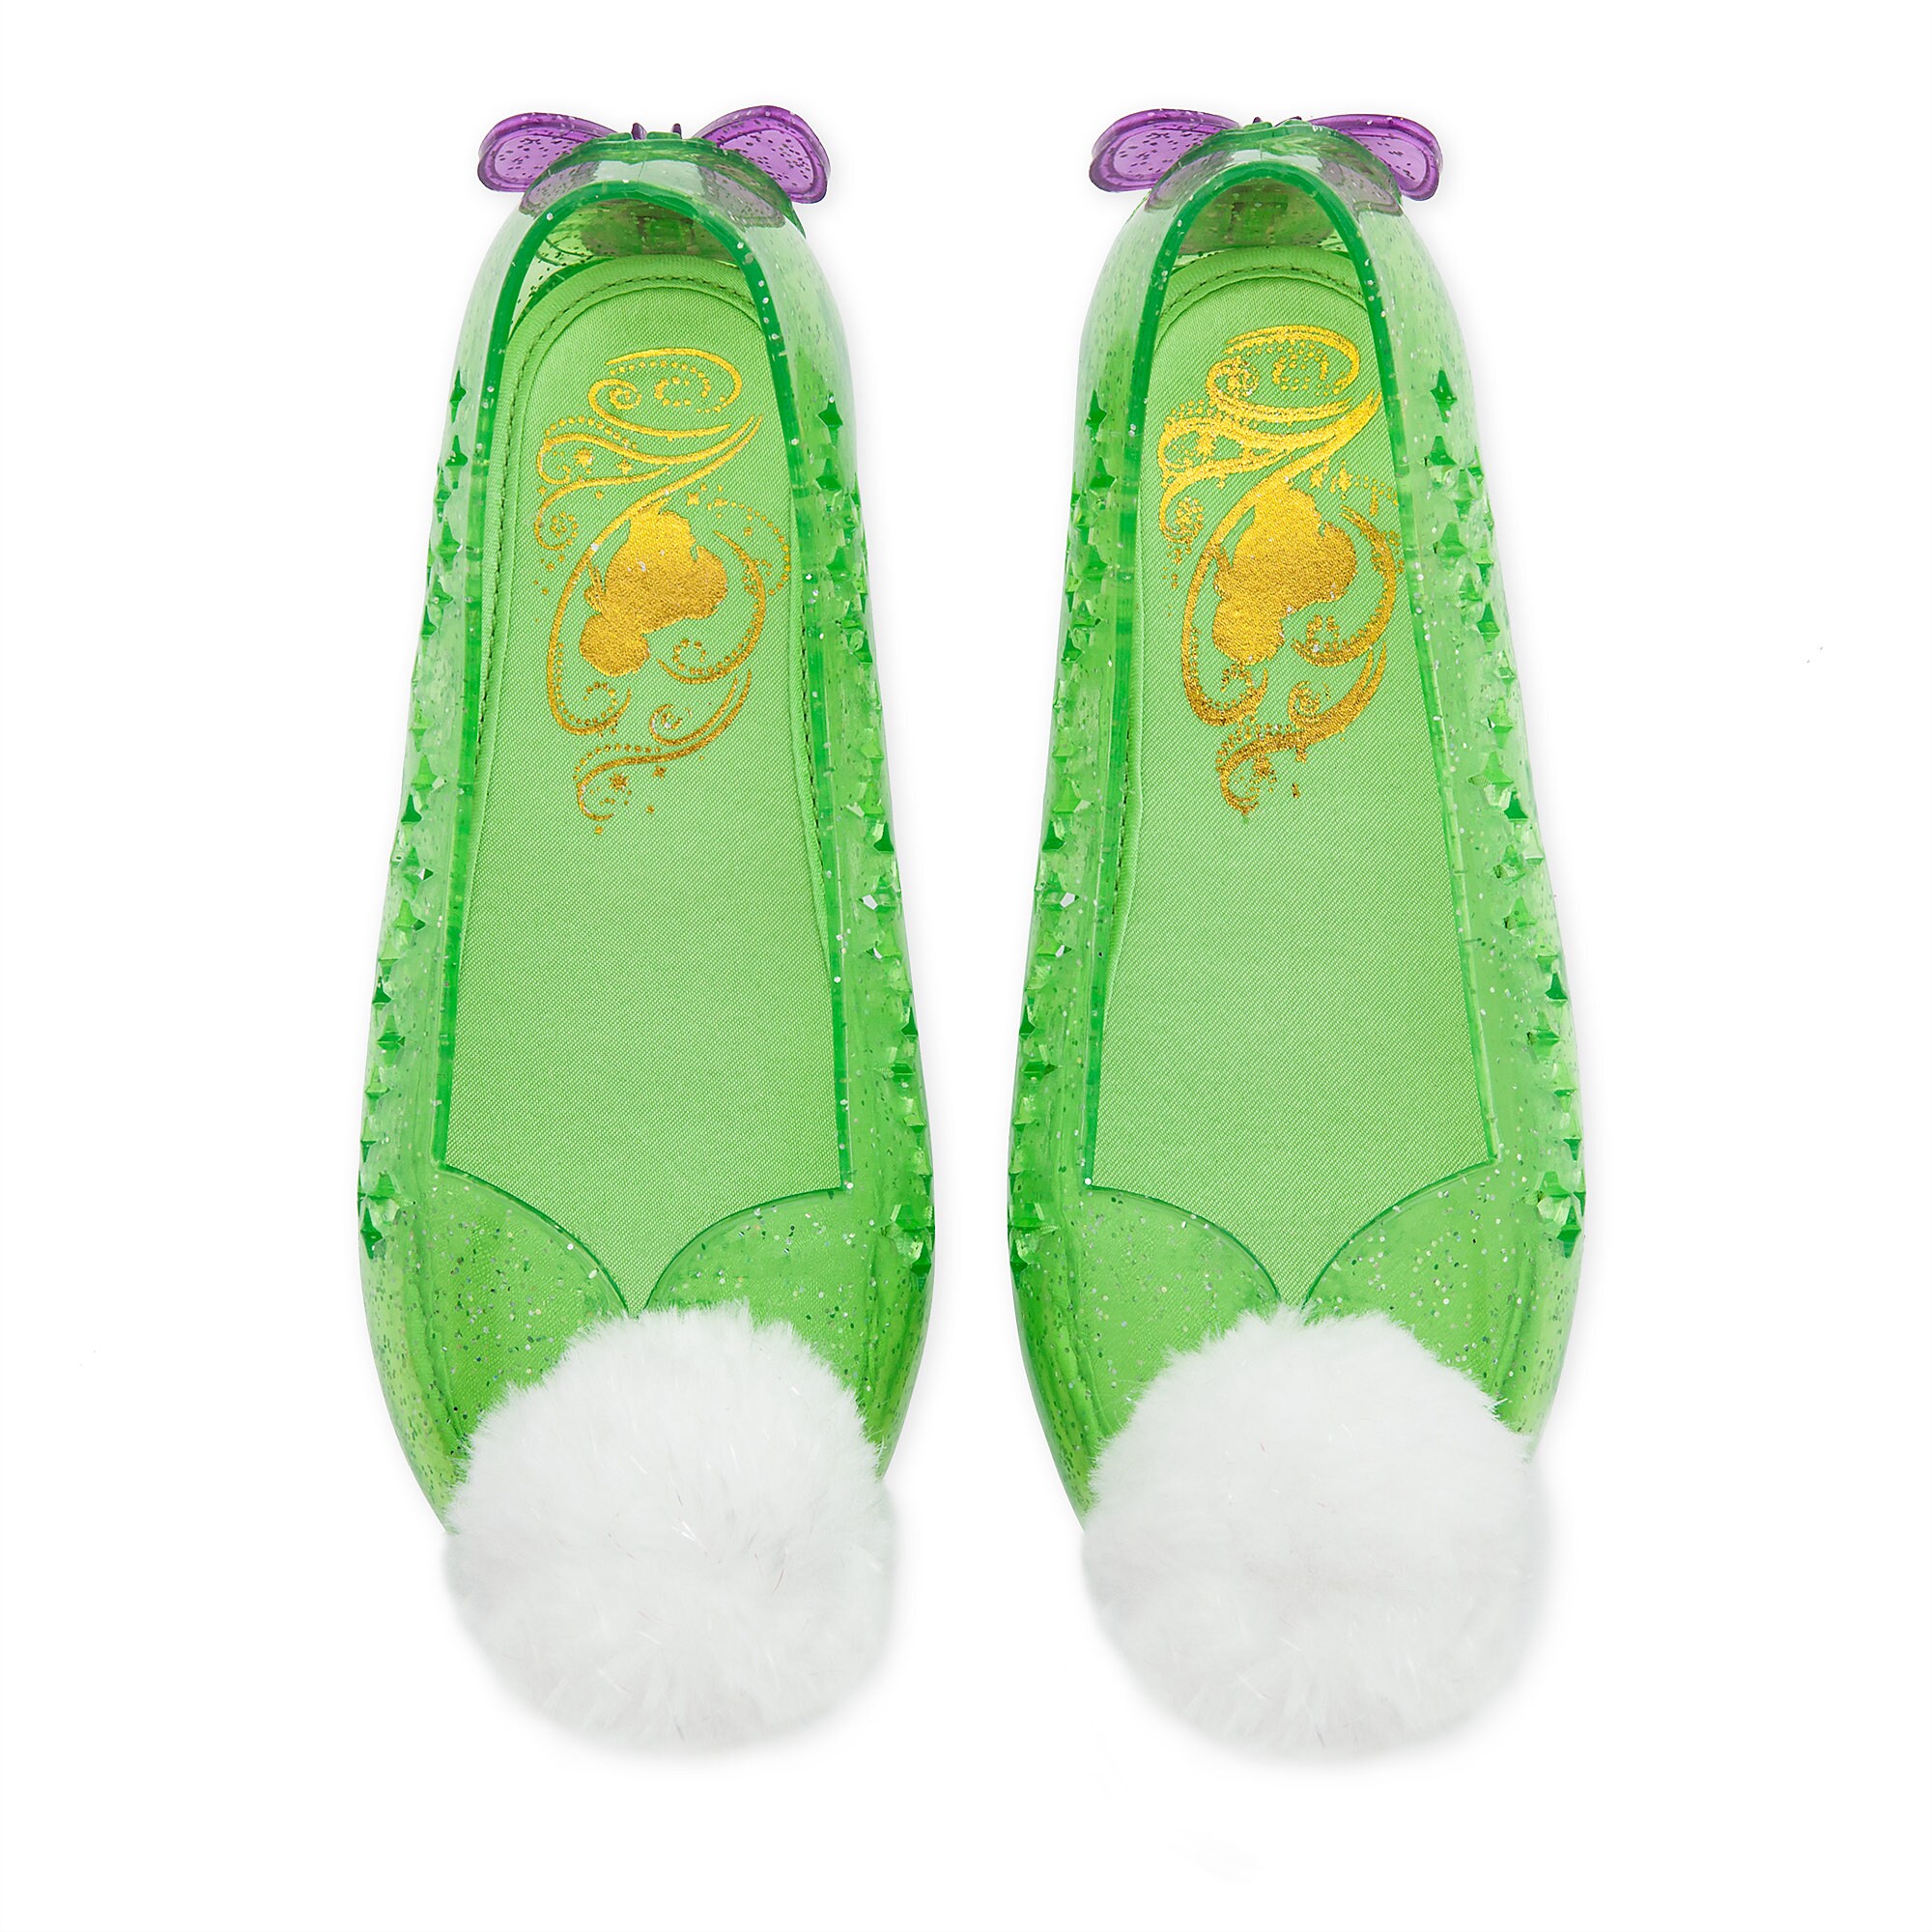 Tinker Bell Glow in the Dark Shoes for Kids